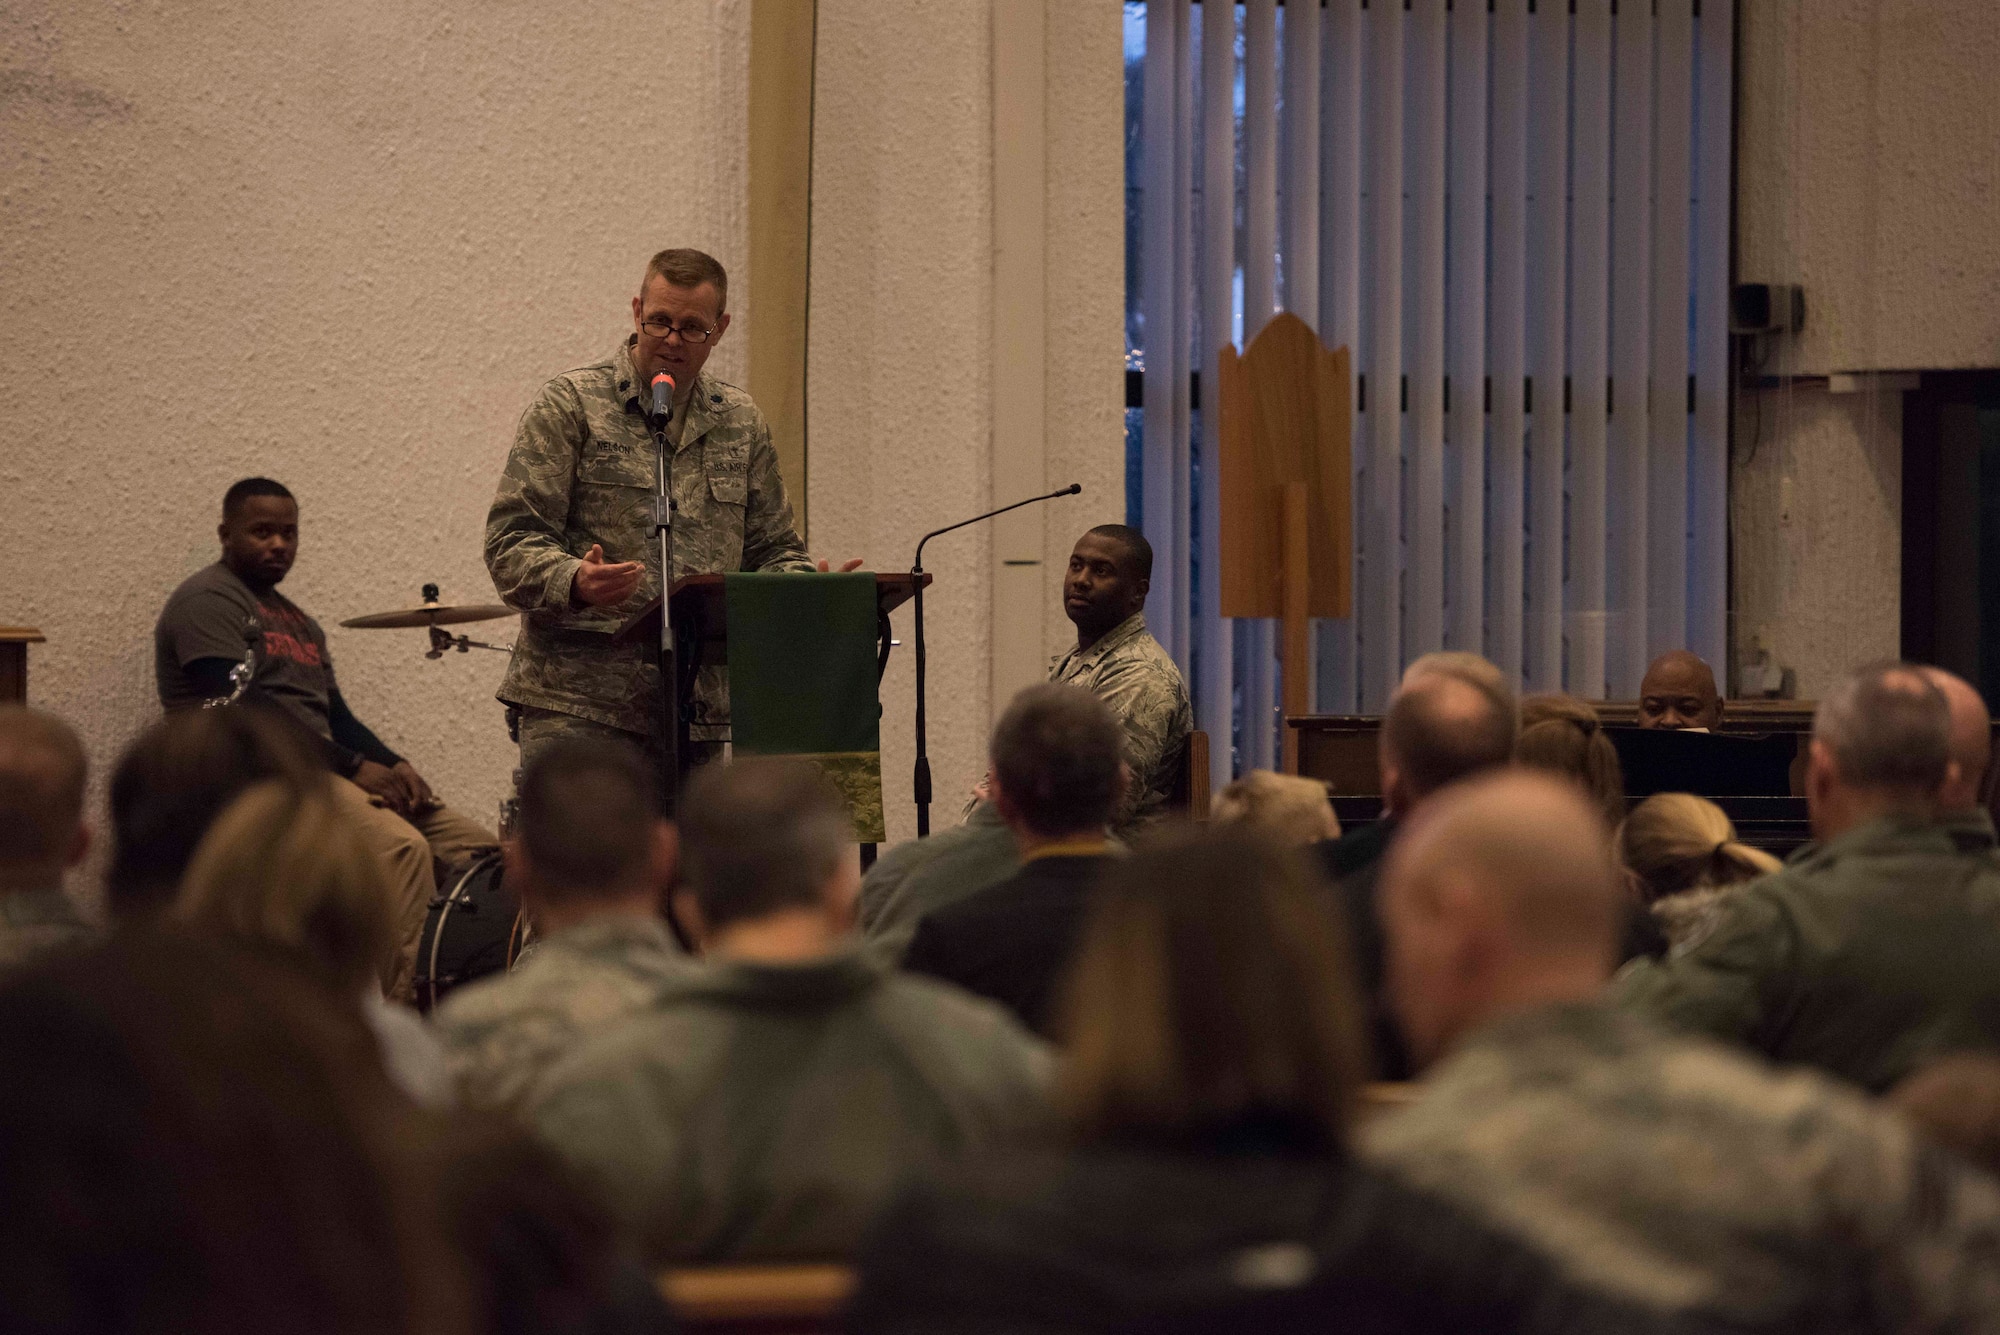 U.S. Air Force Chaplain (Lt. Col.) Erik Nelson, 86th Airlift Wing, speaks during the base Christmas tree lighting ceremony at Ramstein Air Base, Germany, Nov. 29, 2017. The base tree was donated by the mayor of Ramstein-Miesenbach in 2010. (U.S. Air Force photo by Airman 1st Class Devin M. Rumbaugh)